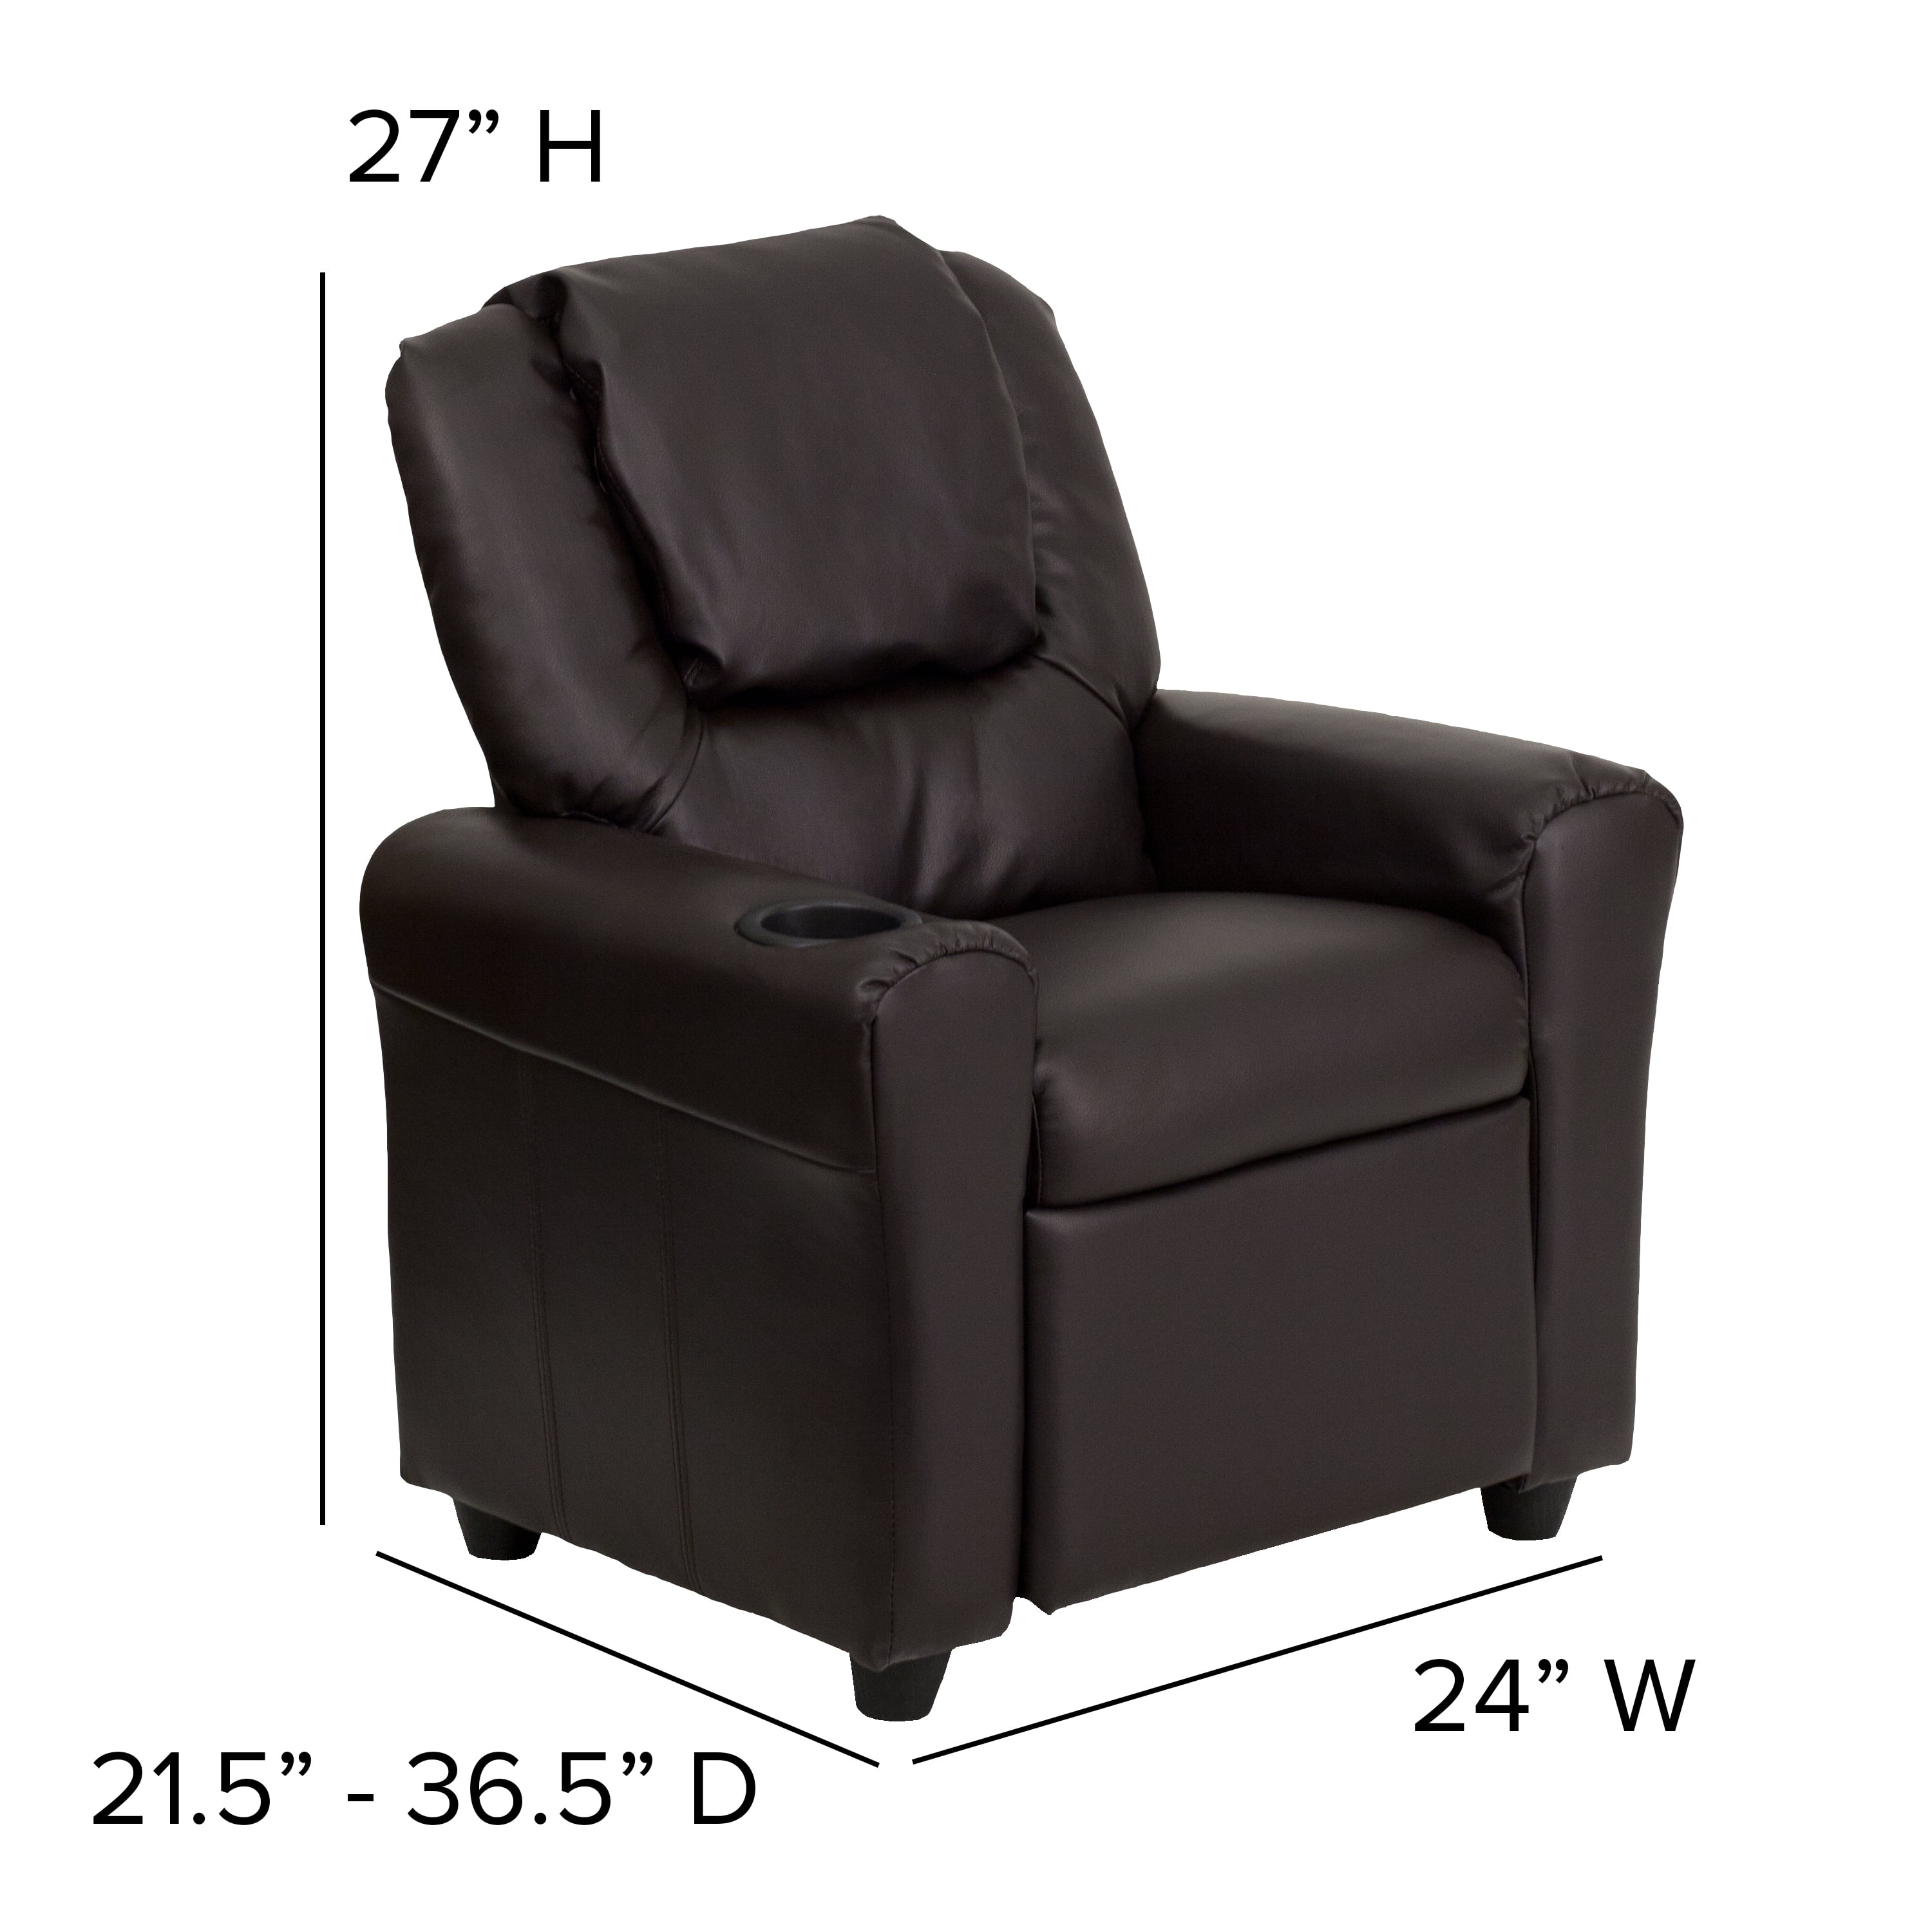 Kids Armchair Recliner Toddler Childrens Upholstered Chair with Cup Holder Brown Faux Cowhide 